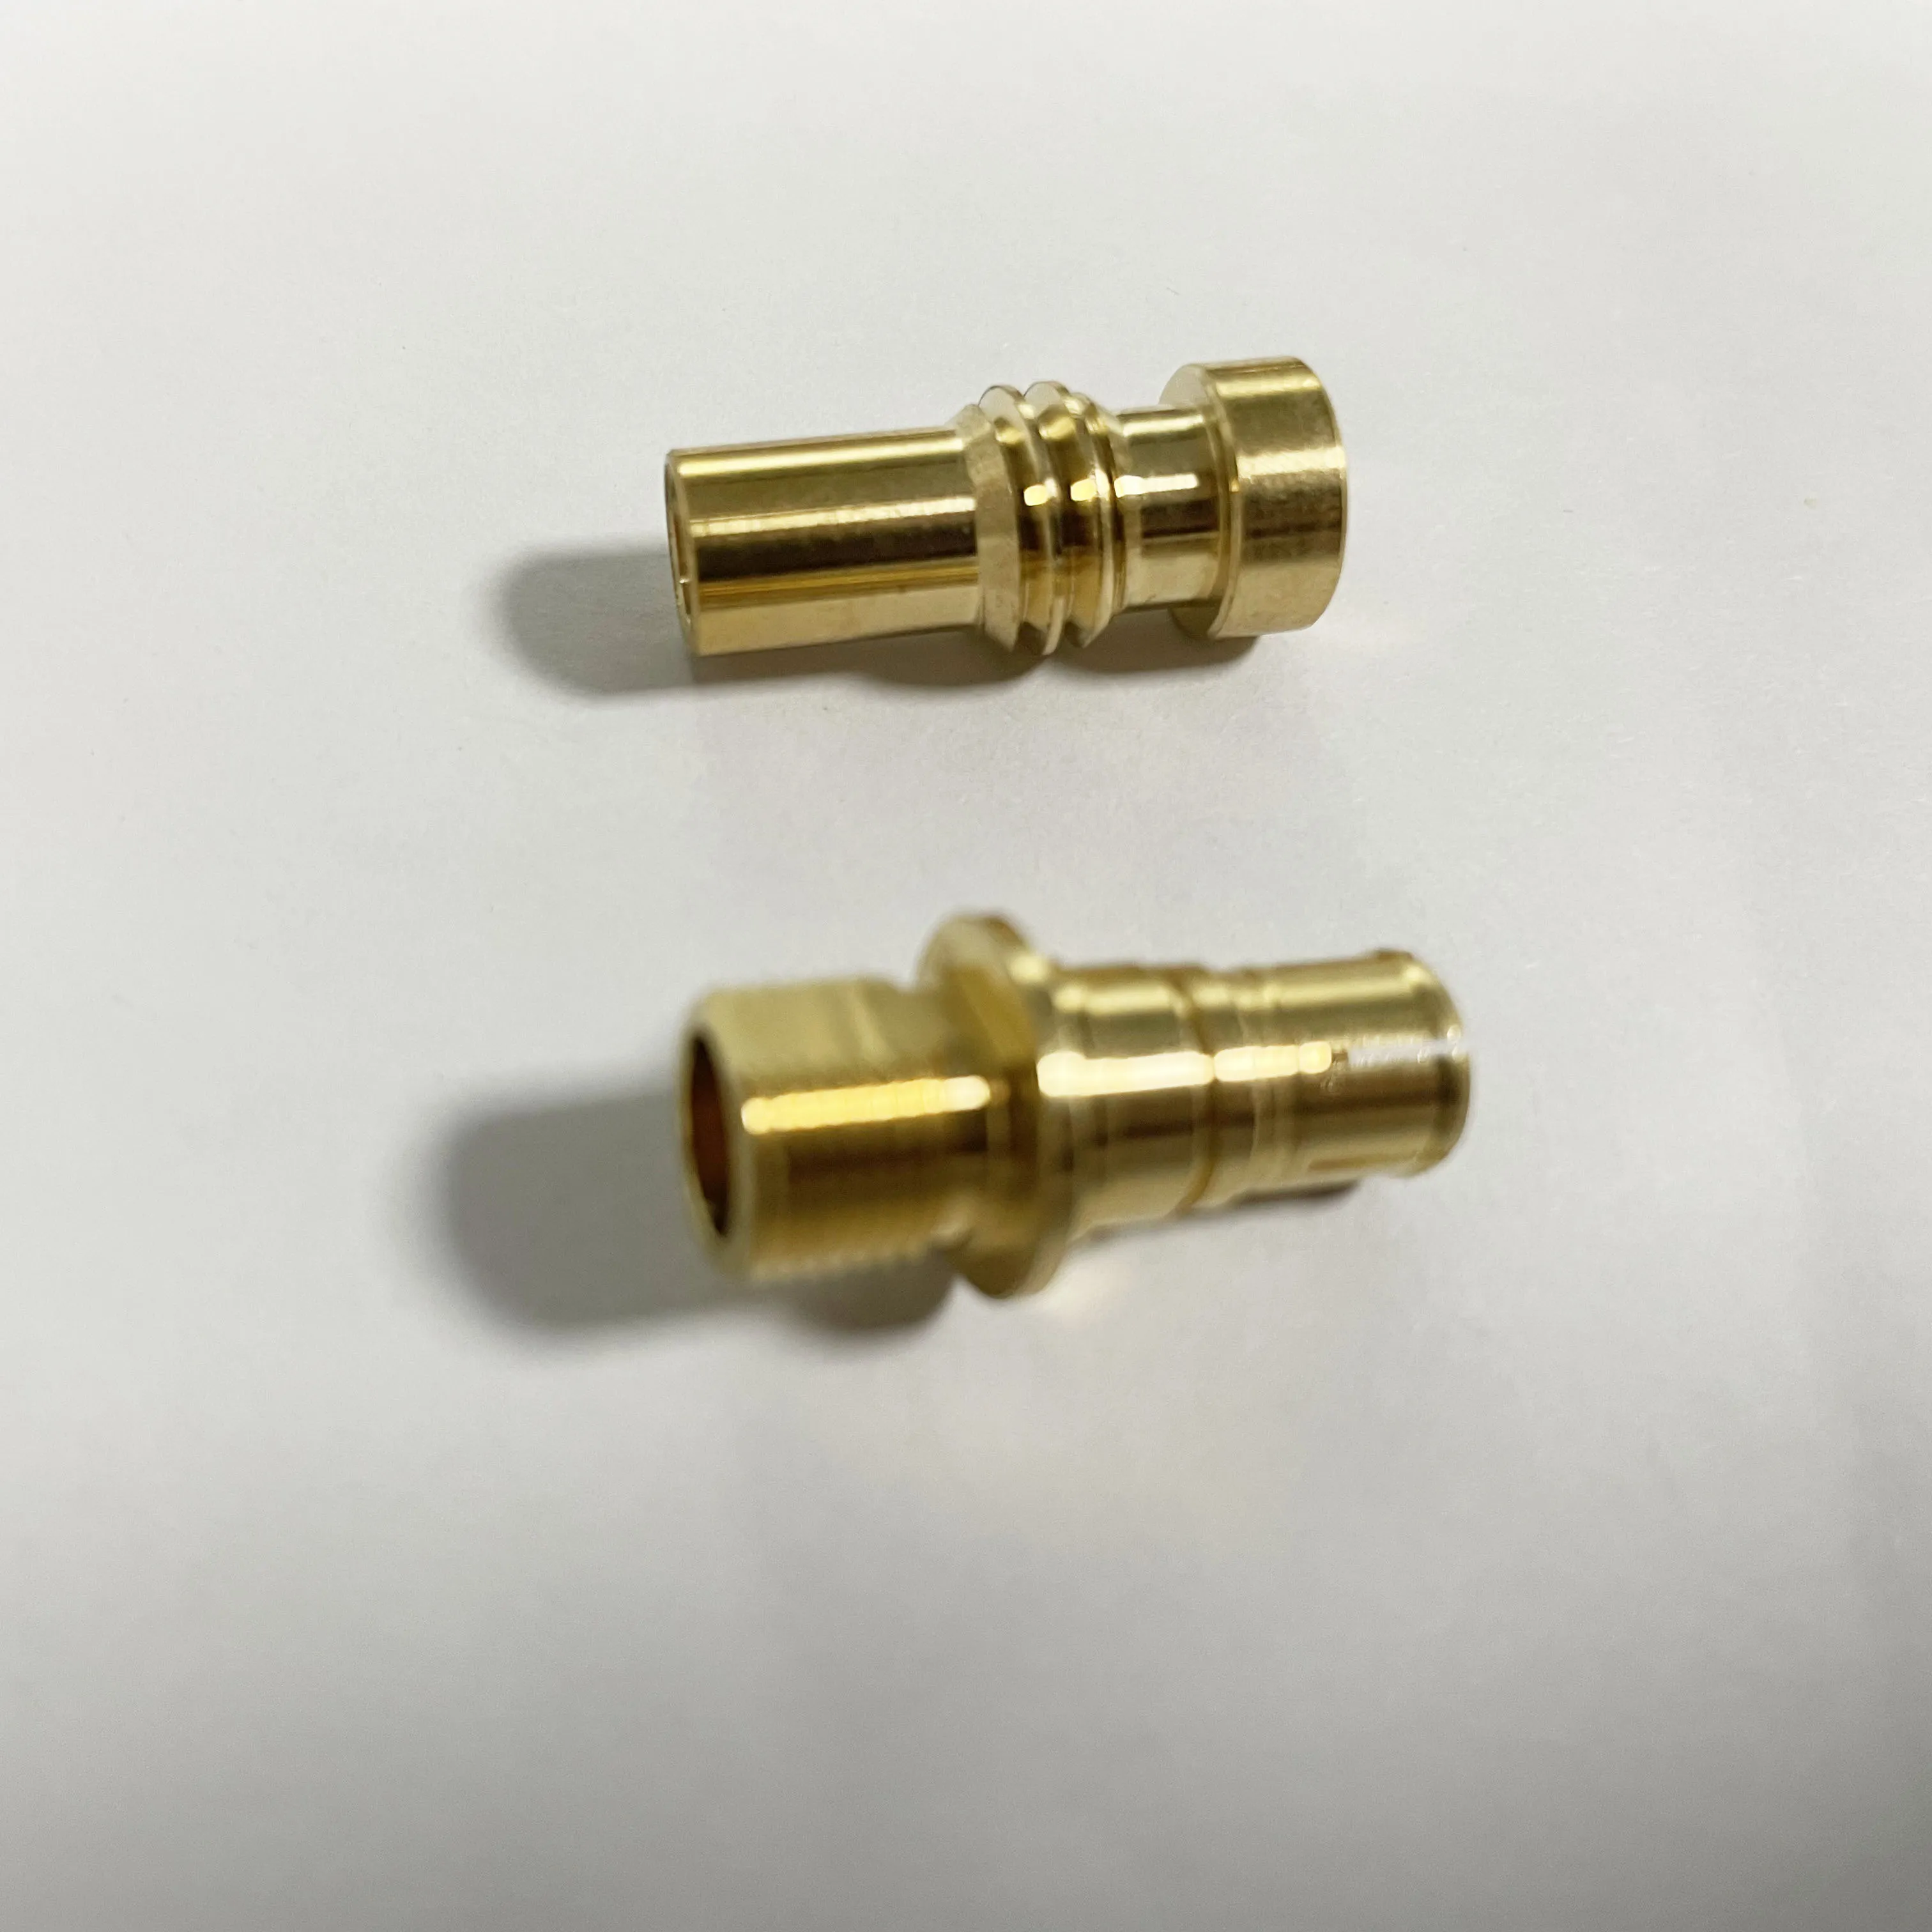 External thread manual hose brass connector fittings pipe garden brass connector Plumbing Pex Fittings